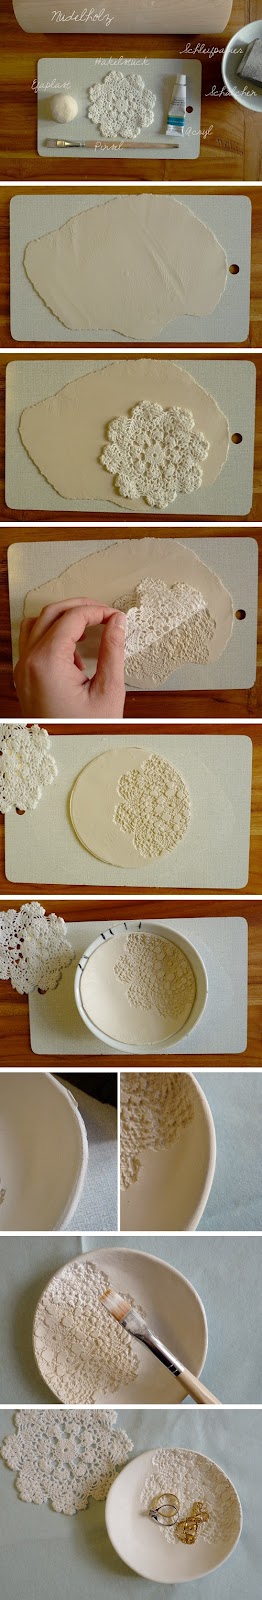 The Bloomin' Couch: Things you can do with doilies and lace